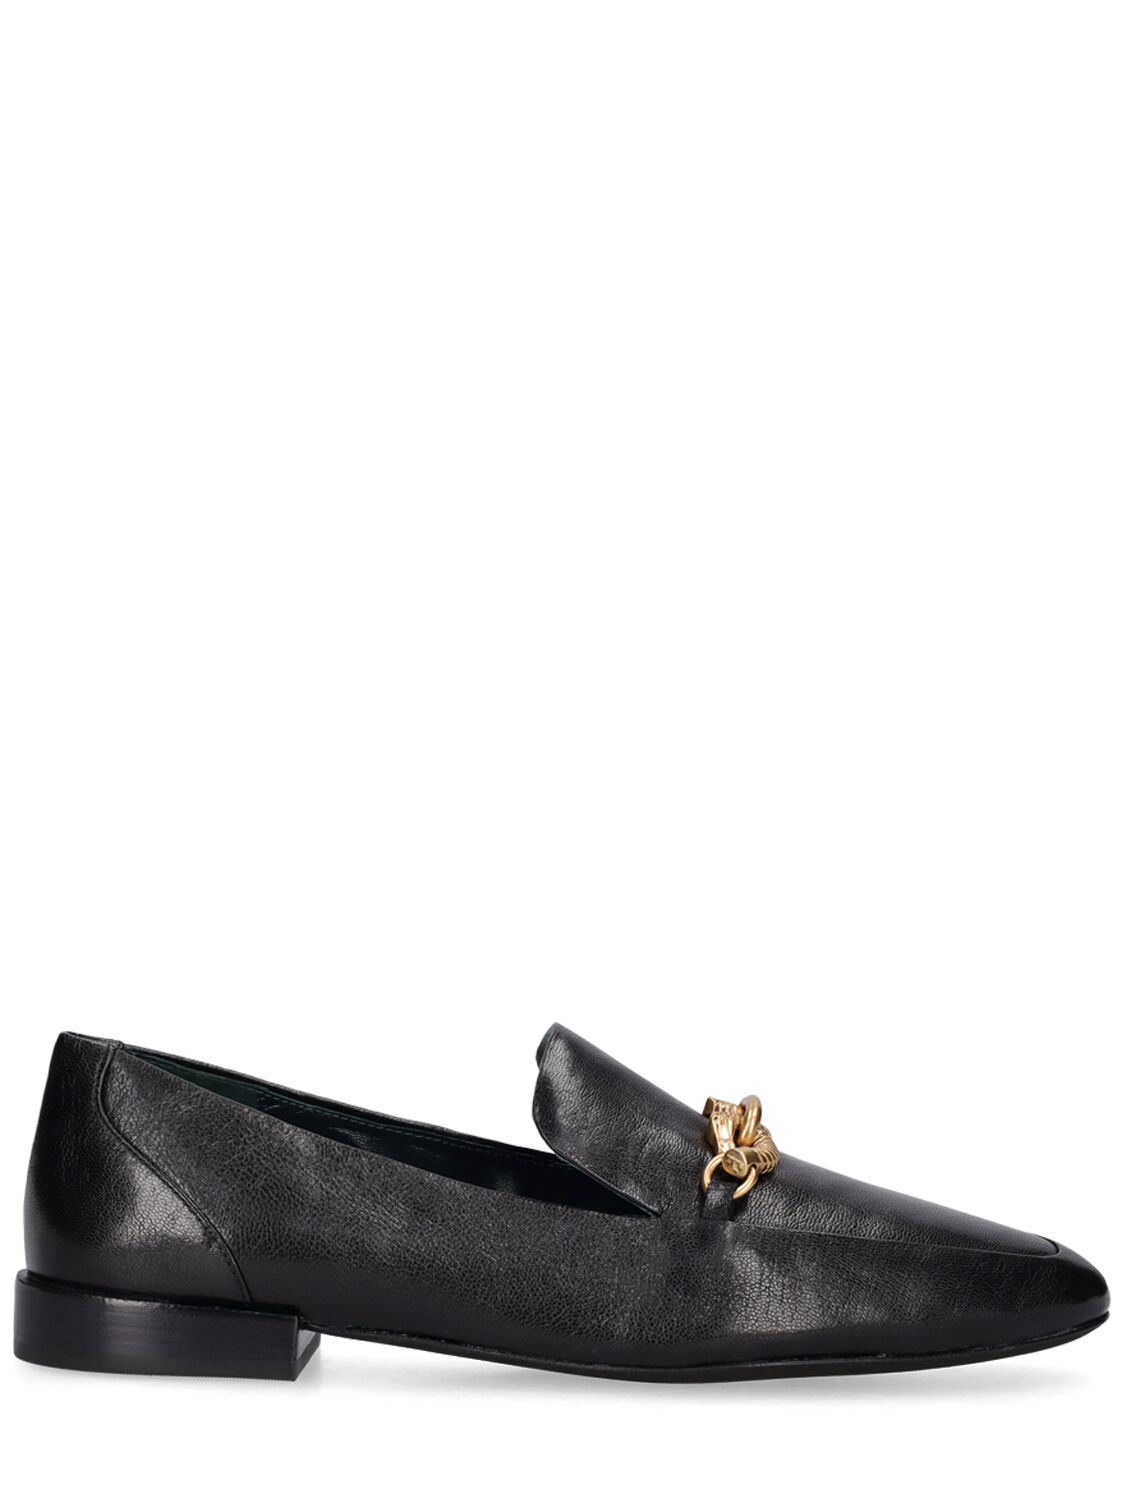 Image of 20mm Jessa Patent Leather Loafers